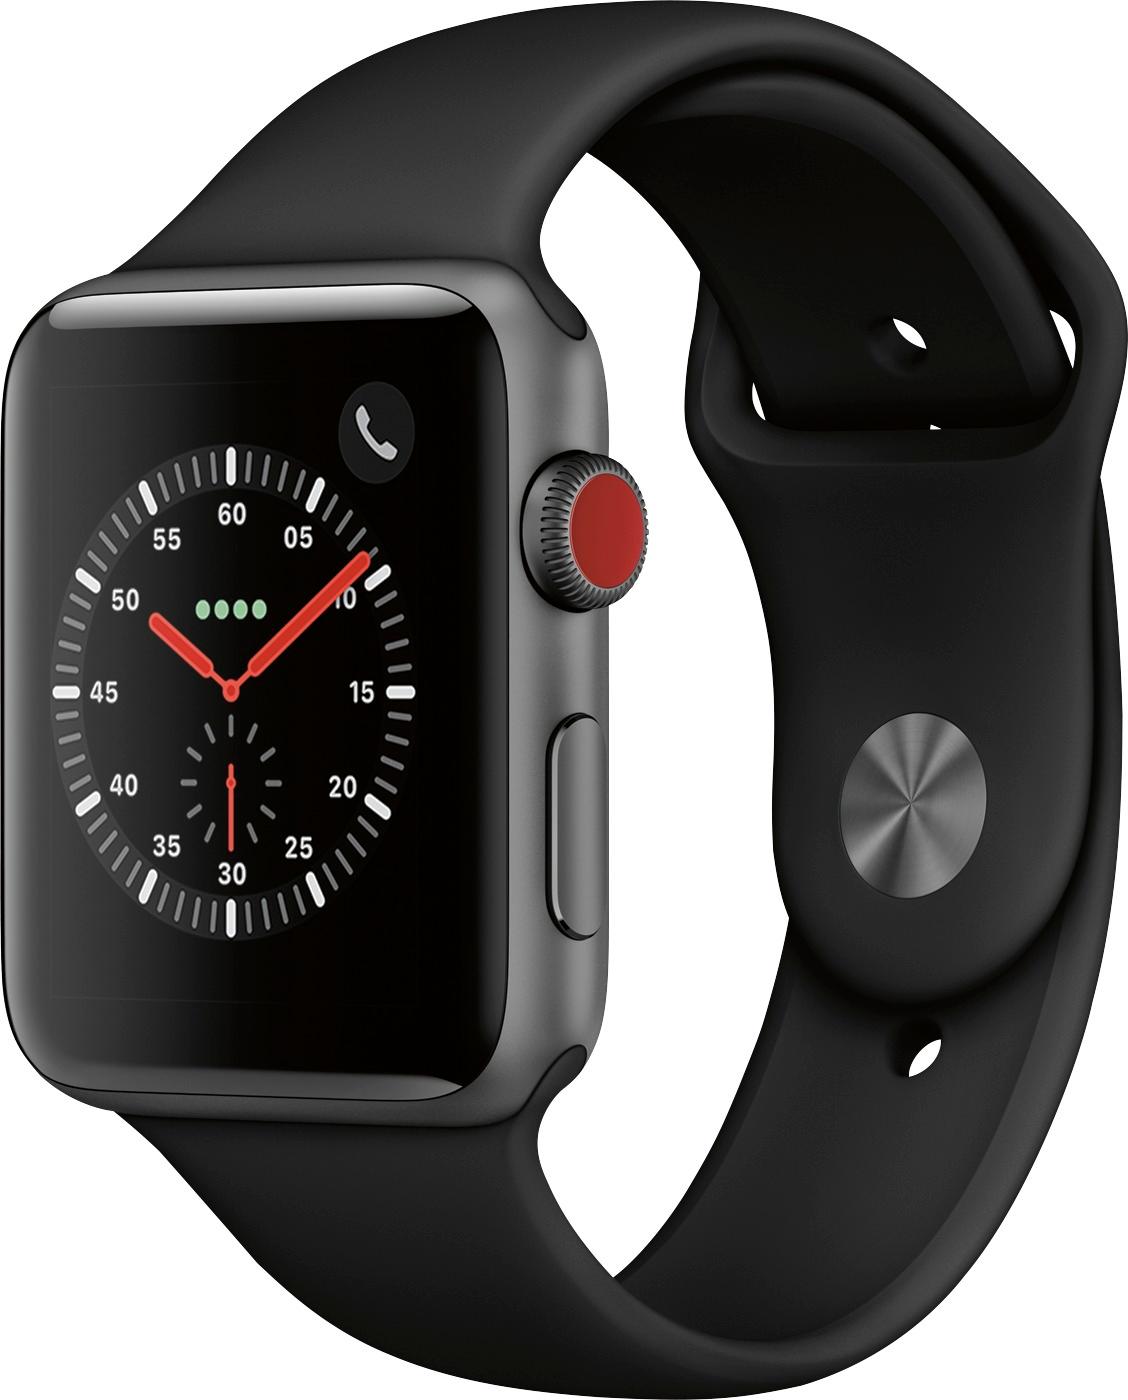 Apple Watch Series 3 (GPS + Cellular), 42mm Space Gray Aluminum Case with Black Sport Band - Space Gray Aluminum